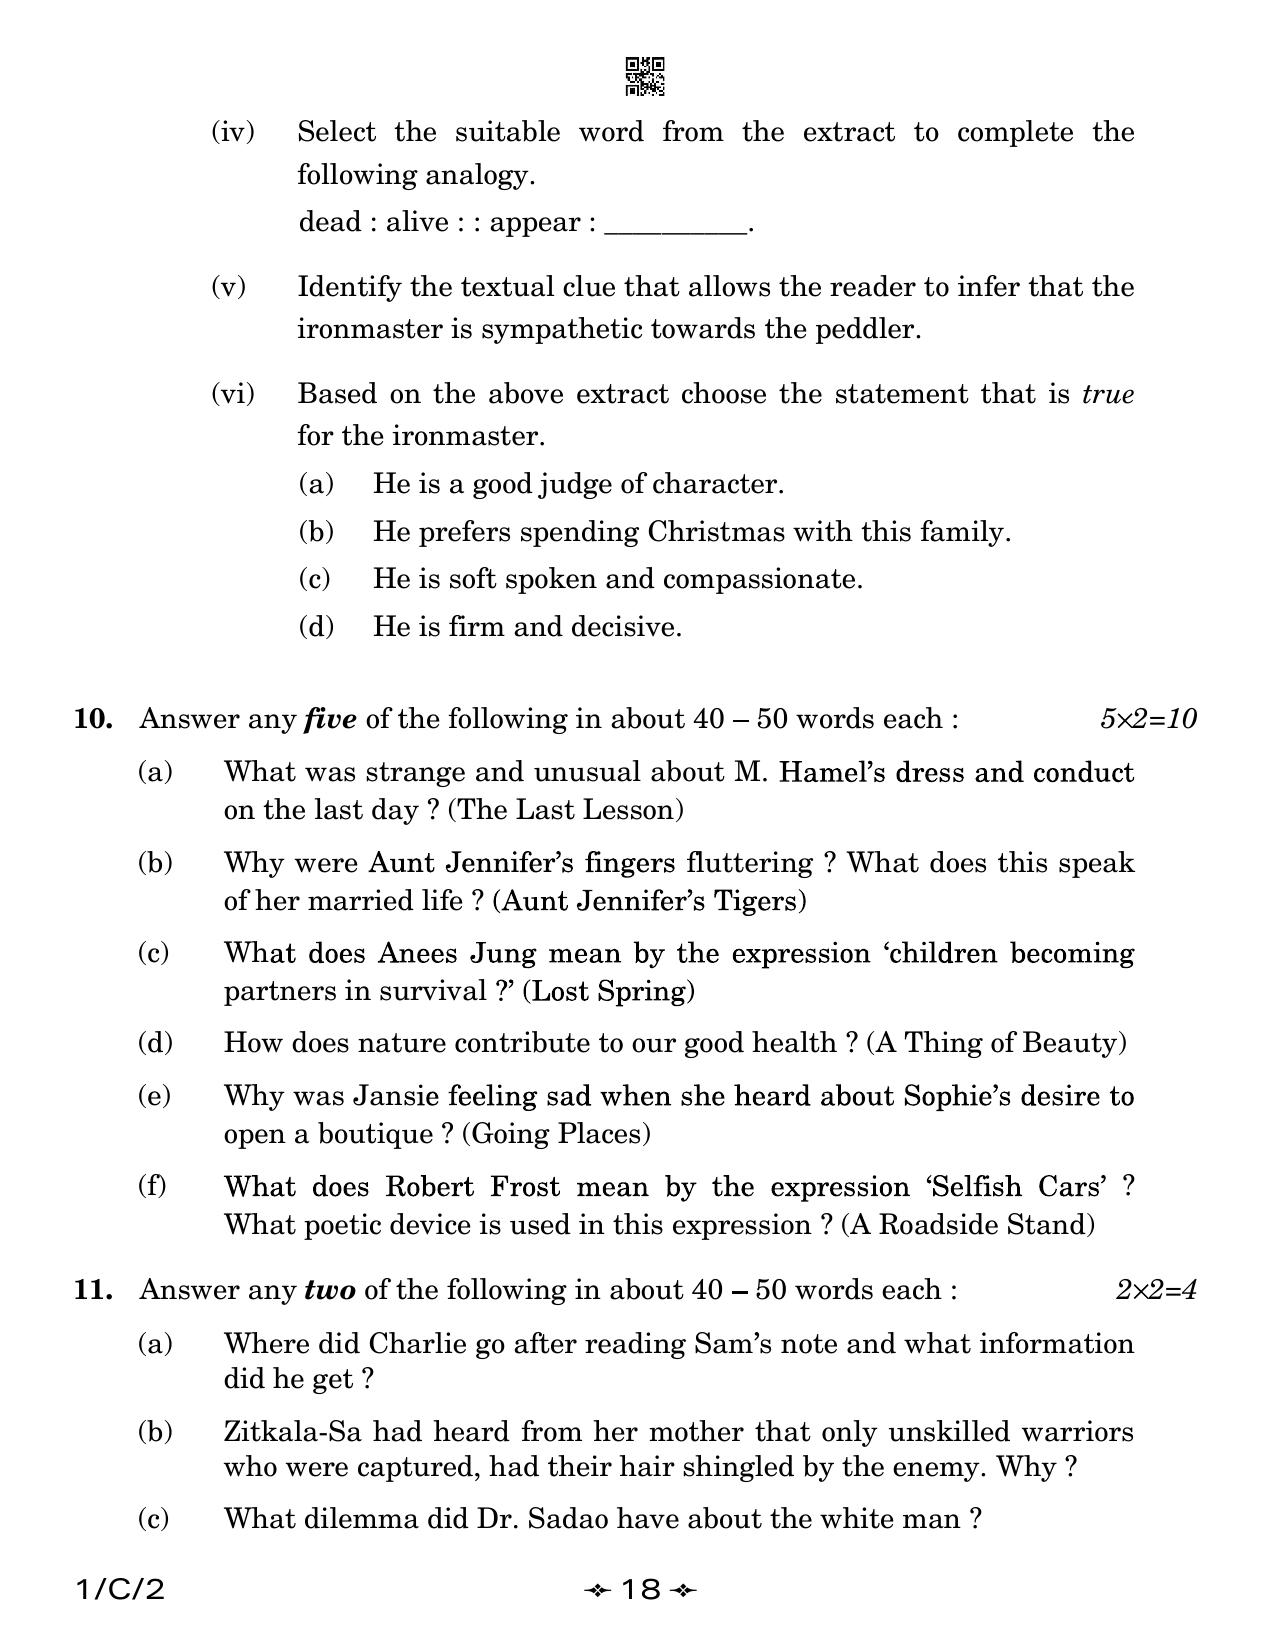 CBSE Class 12 1-2 English Core 2023 (Compartment) Question Paper - Page 18